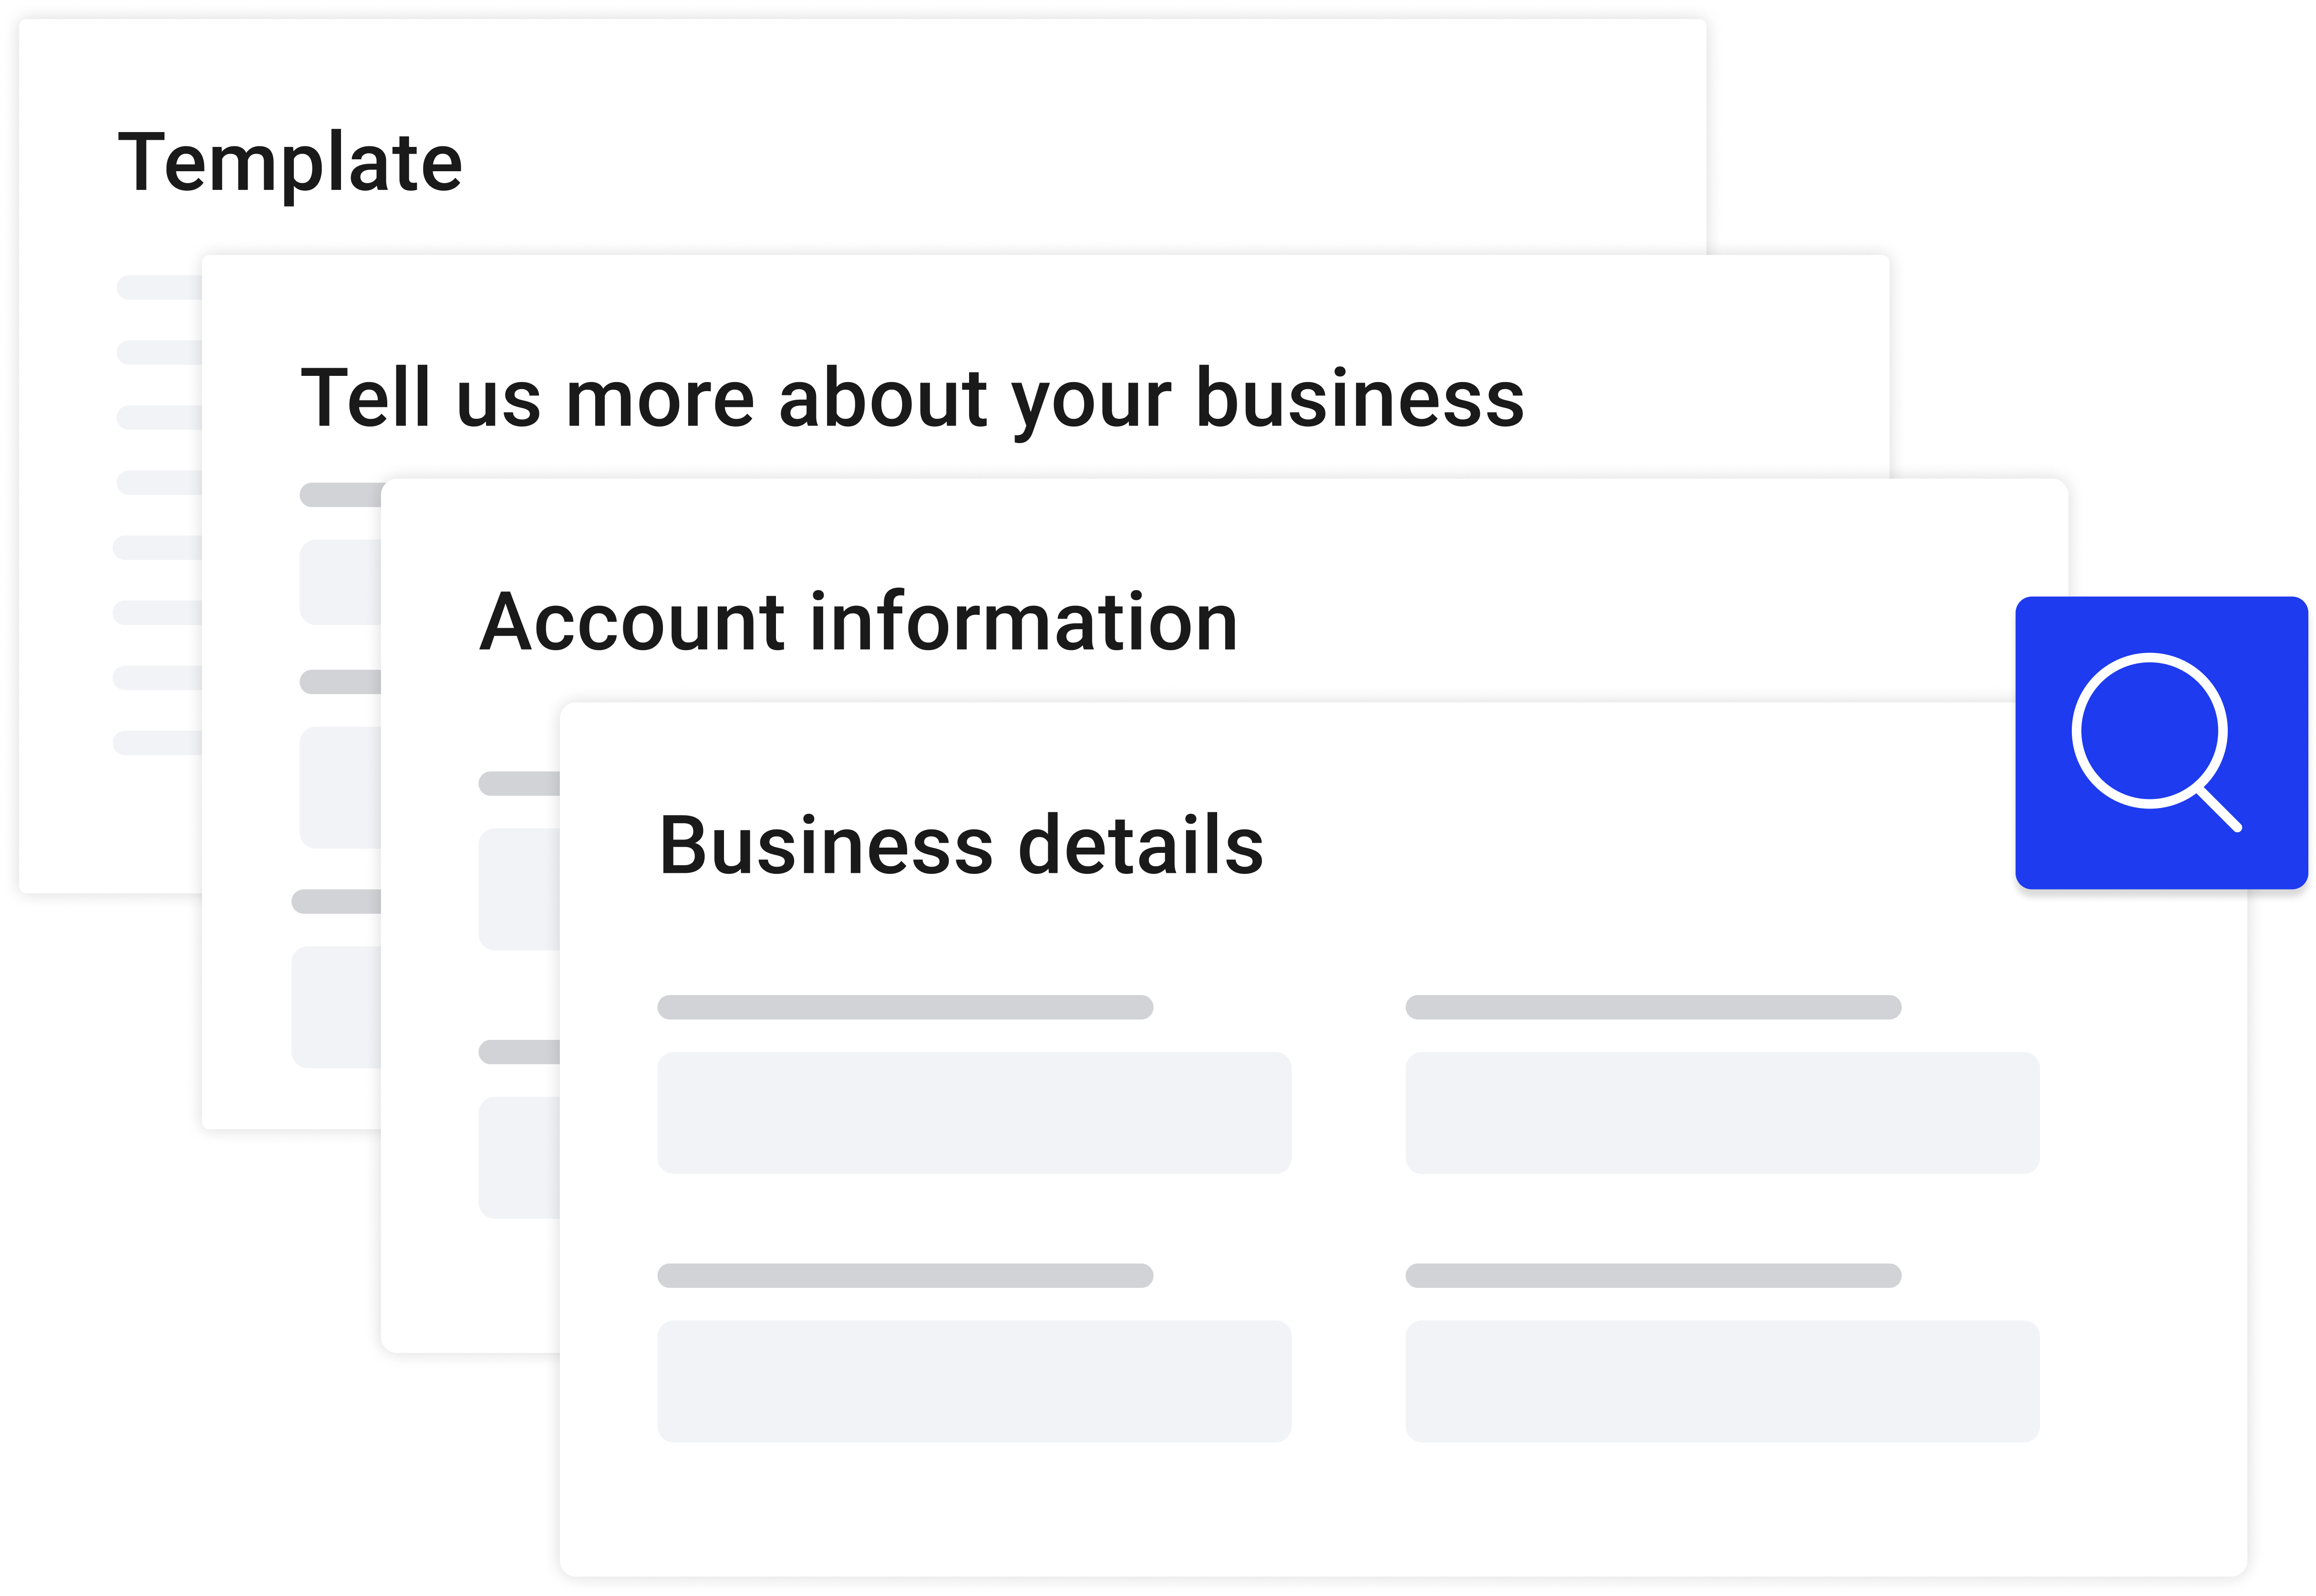 An image showing the steps included in the Mono Quick Creator website flow: Adding business details, account information, more info about the business, and selecting a template.